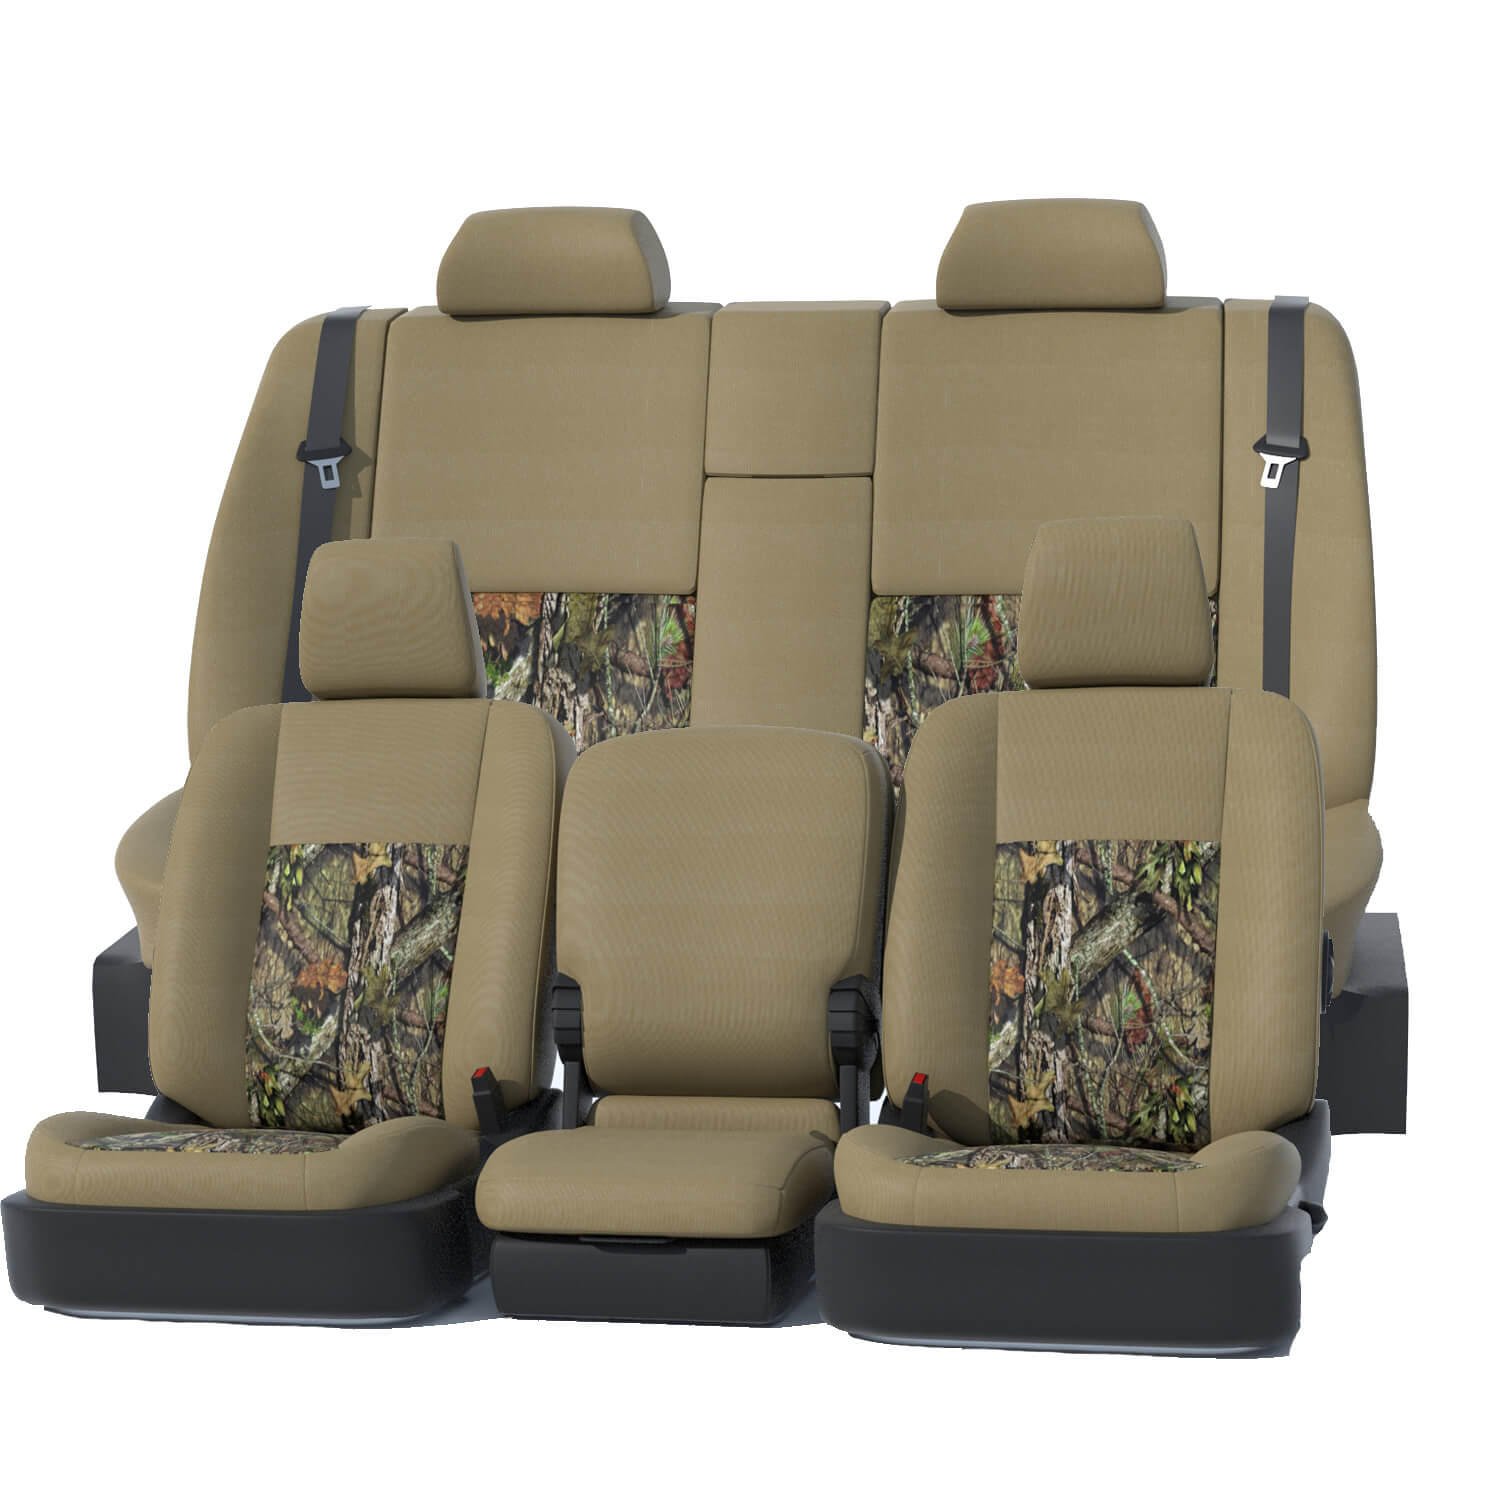 Endura PrecisionFitÂ® Car Seat Covers  Padded Seat Covers For Trucks and Car  Seats